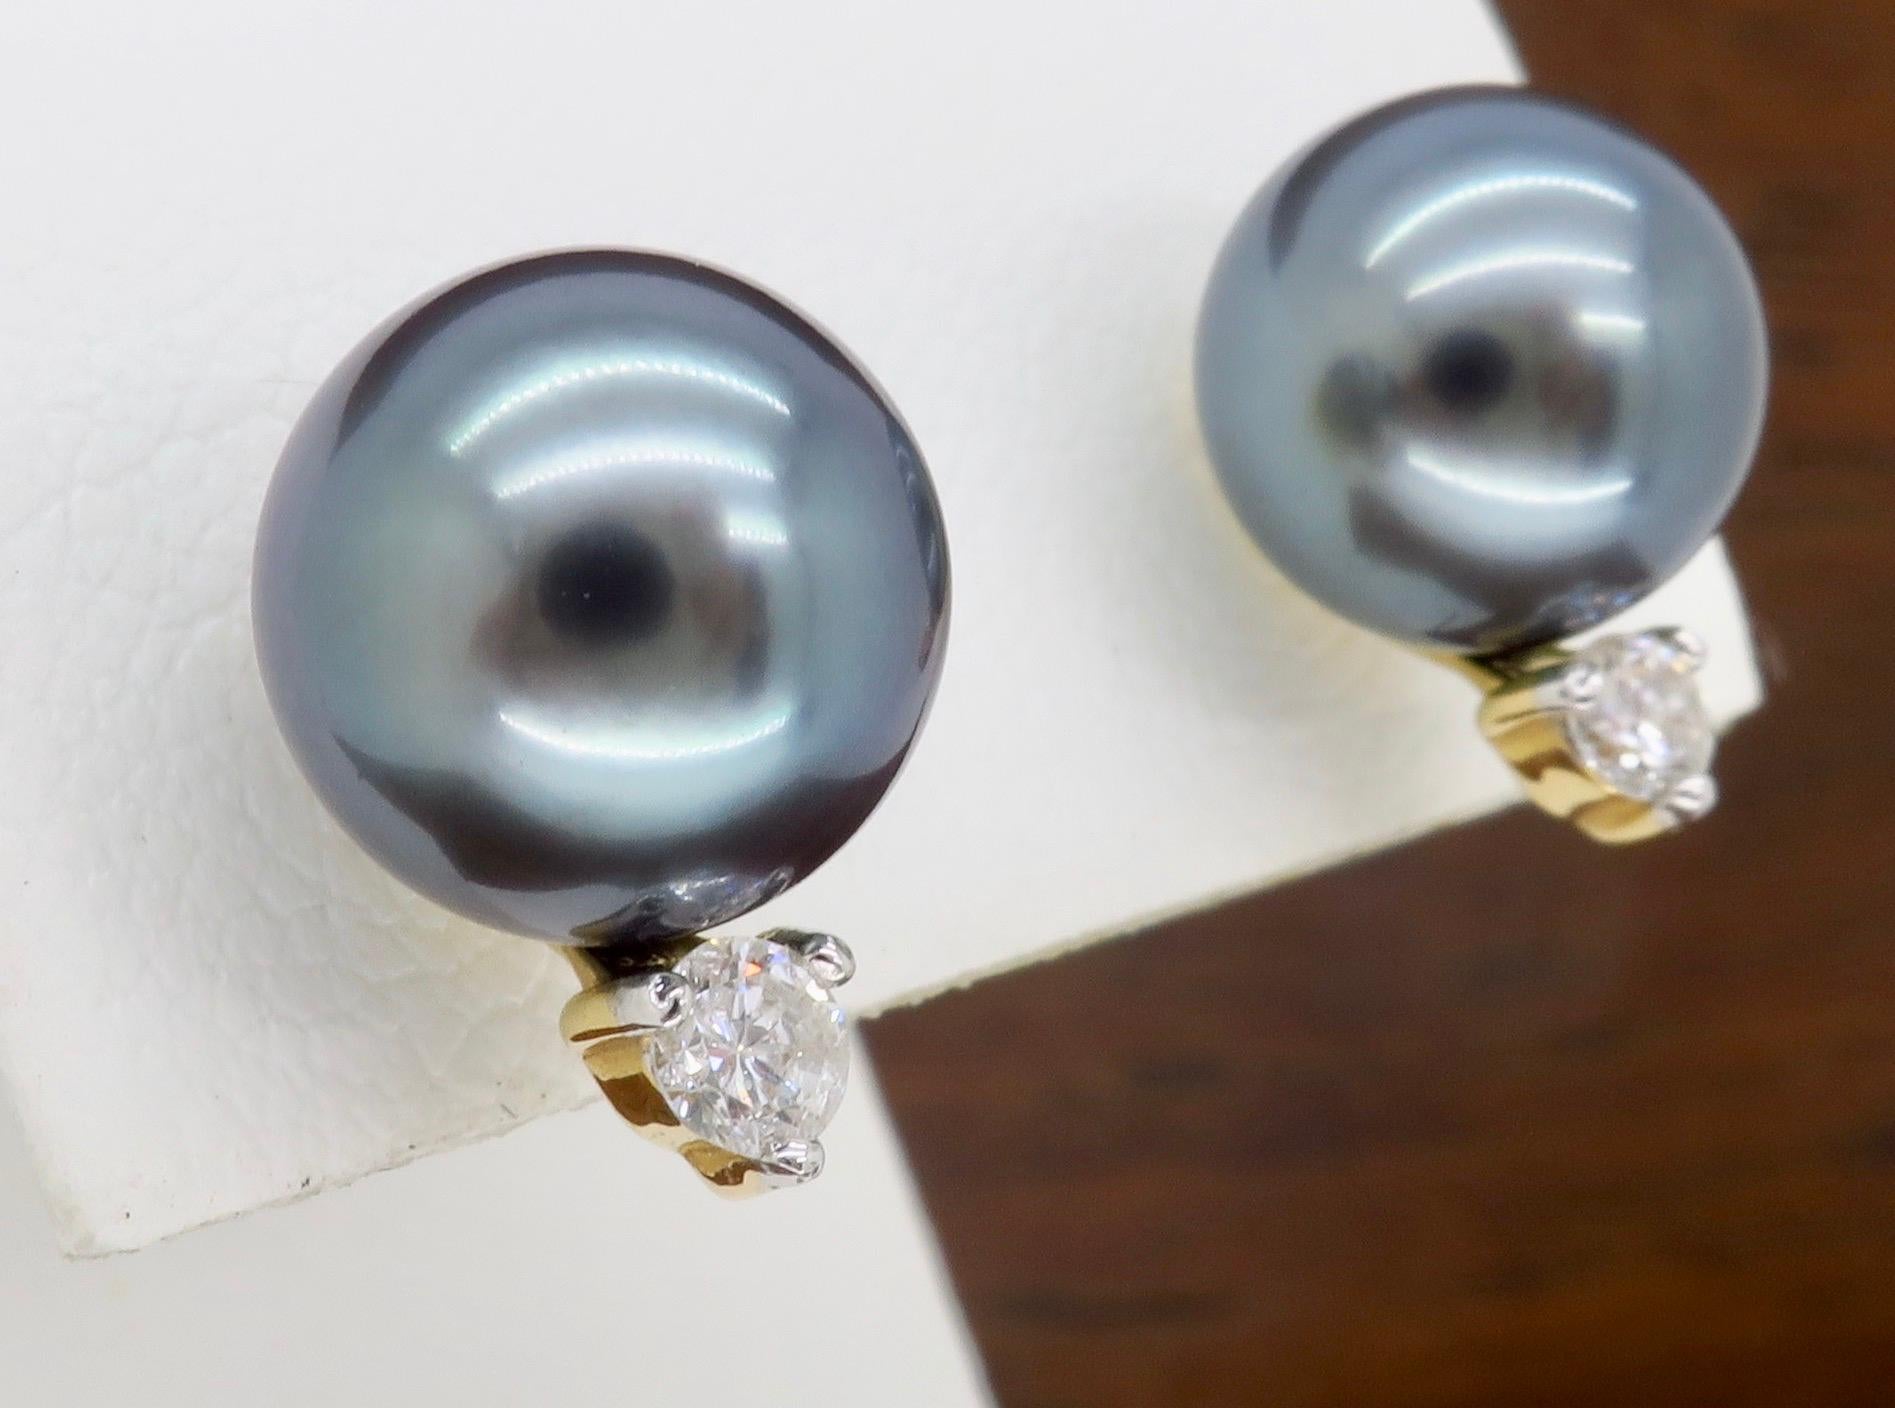 Classic pair of Tahitian Pearl & Diamond stud earrings. 

Gemstone: Tahitian Pearl & Diamond
Pearl Size: Approximately 9.2 MM 
Diamond Carat Weight: .20CTW
Metal: 14K Yellow Gold
Marked/Tested: “14K” “CPI